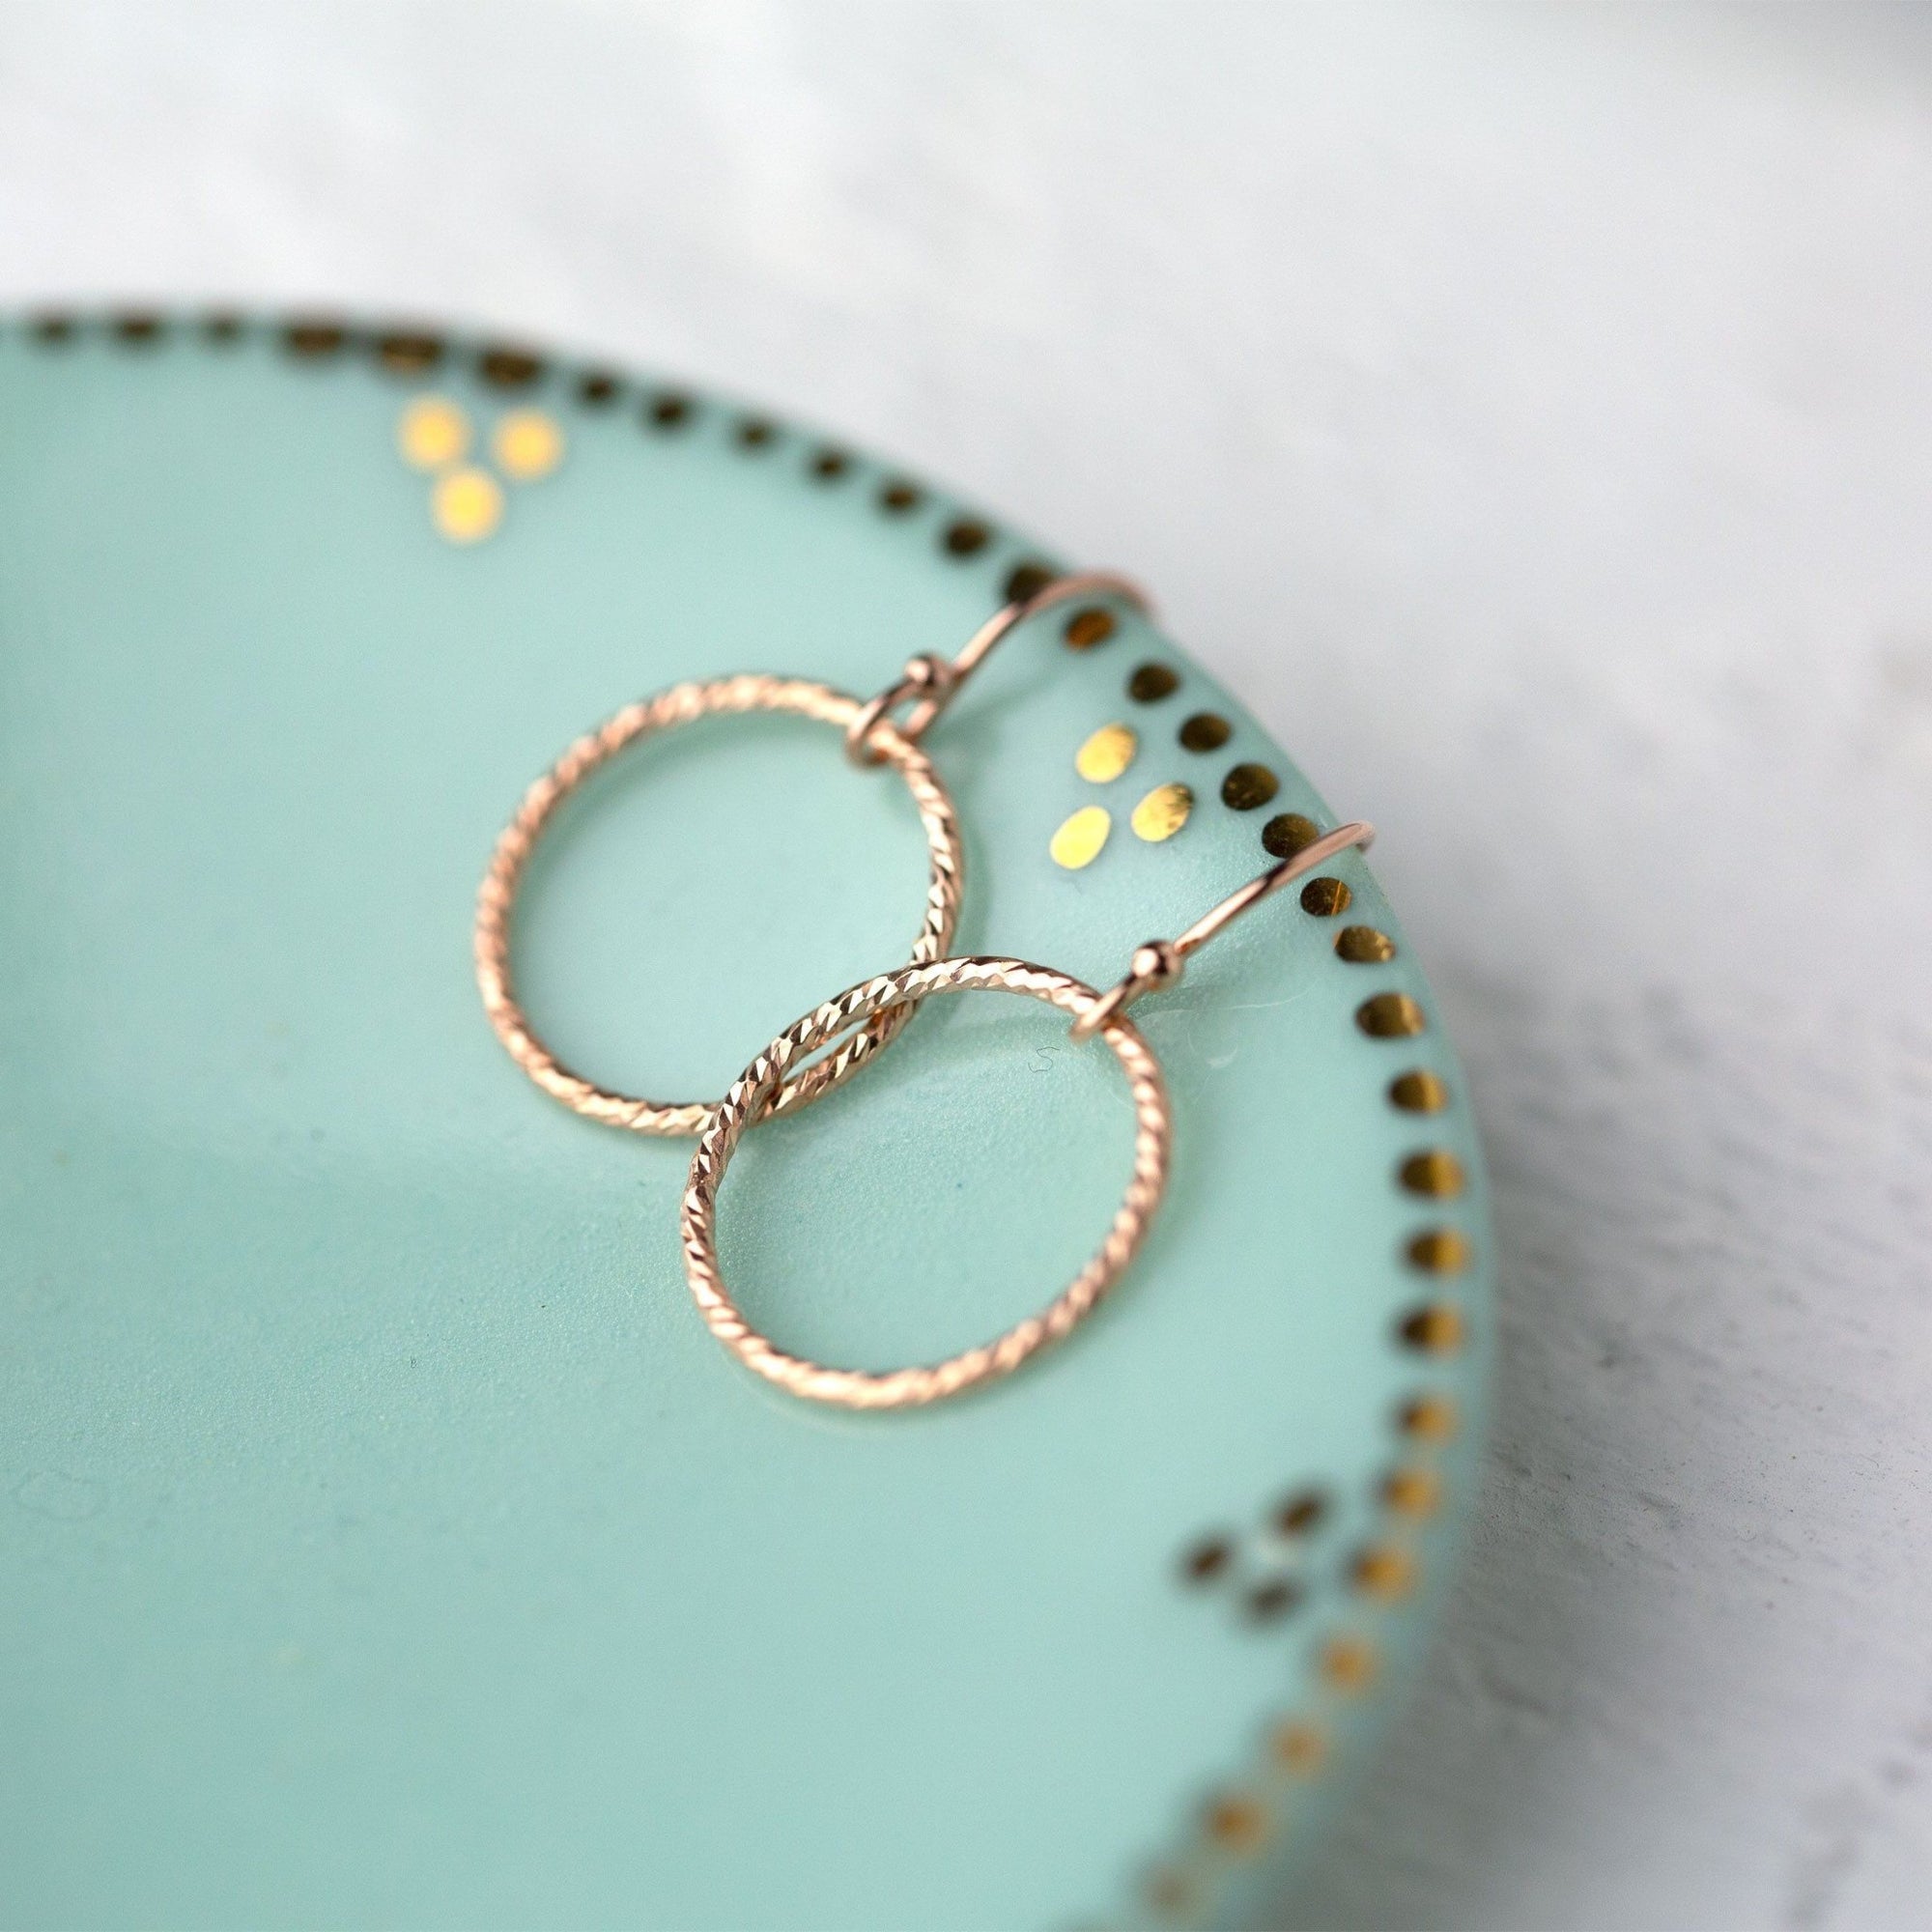 Rose Gold Sparkle Circle Earrings - Handmade Jewelry by Burnish